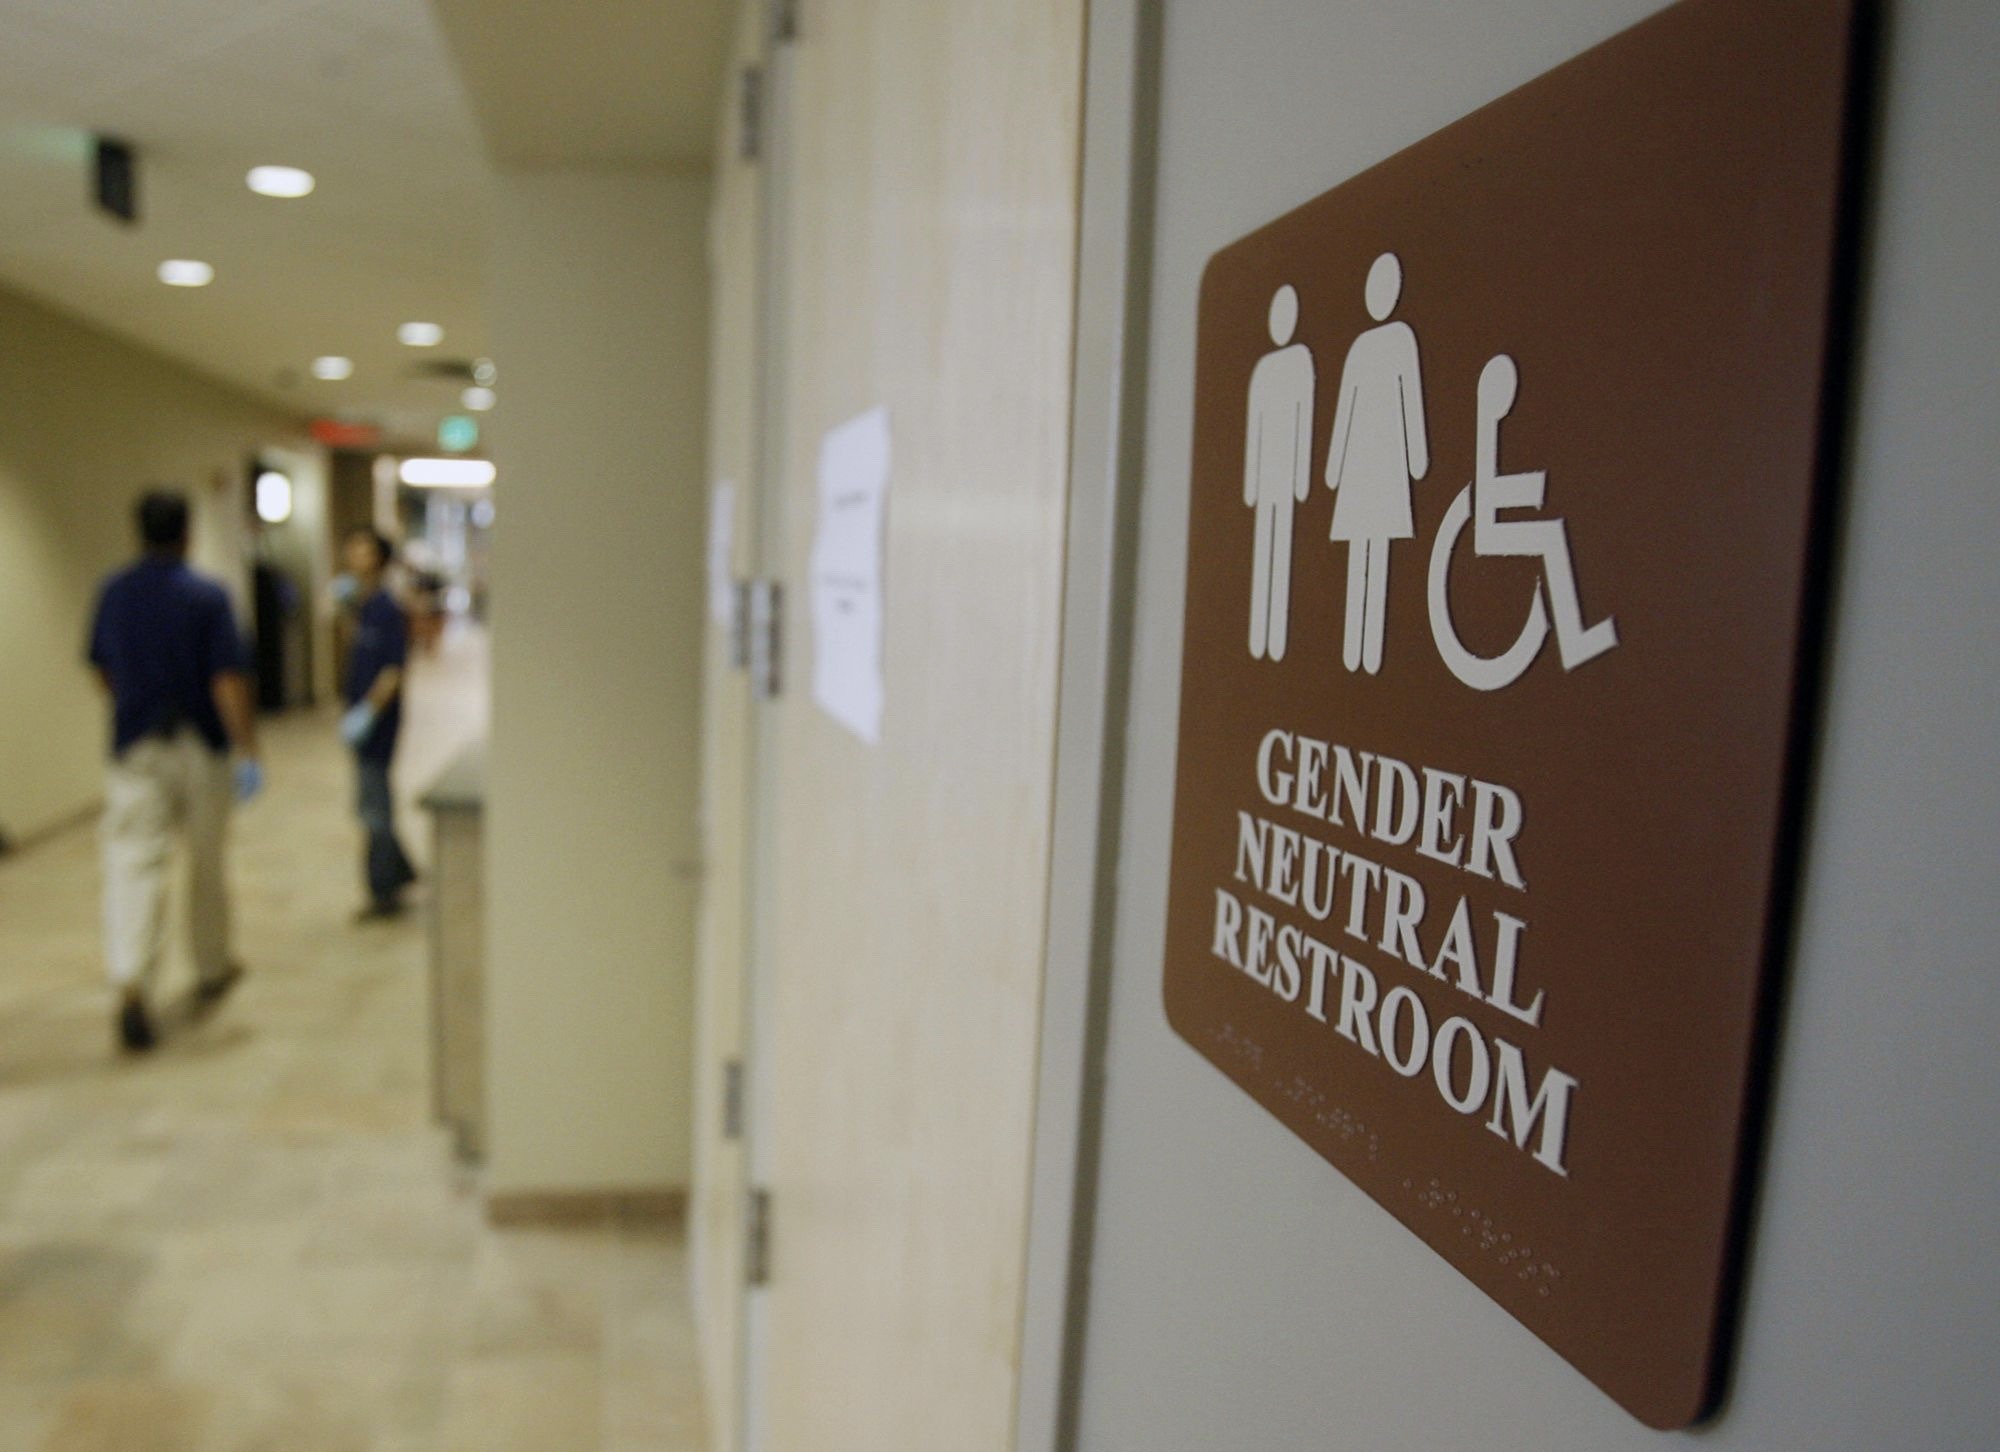 University trial of gender-neutral toilets receives ‘transphobic’ backlash from students